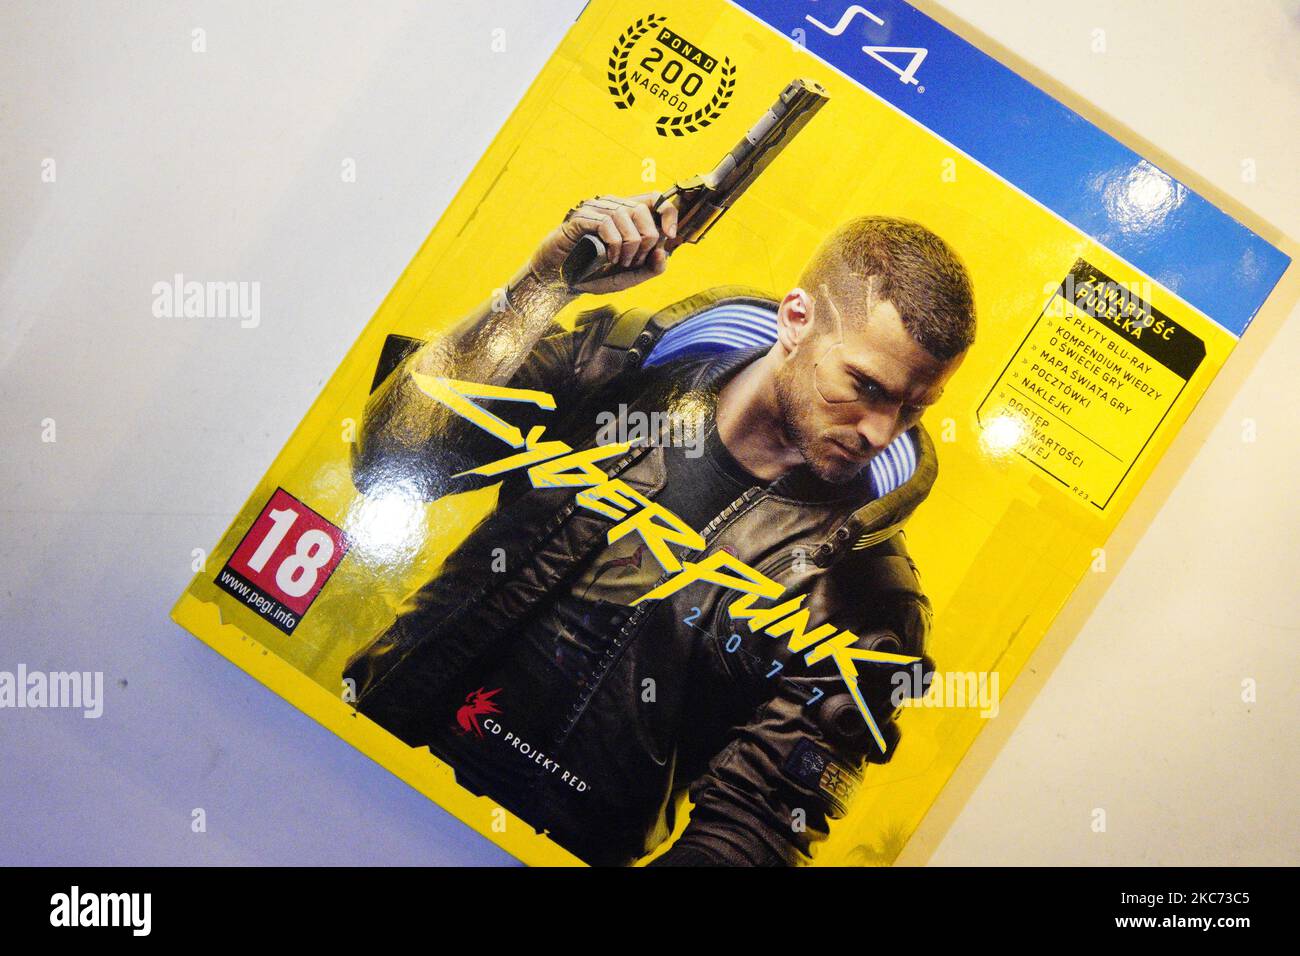 The Cyberpunk 2077 game box is seen in Warsaw, Poland on January 6, 2021. Cyberpunk 2077 was hailed as the 2020's most anticipated game however glitches in the game's first release led to deep disappointment with fans. After nearly a decade of hyped anticipation critics blaimed bugs in the game on mismangement within the company with investors threatening a class action suit. The large amount of serious complaints even led Sony to offer Playstation customers a refund despite this not being part of the terms of service. (Photo by Jaap Arriens/NurPhoto) Stock Photo